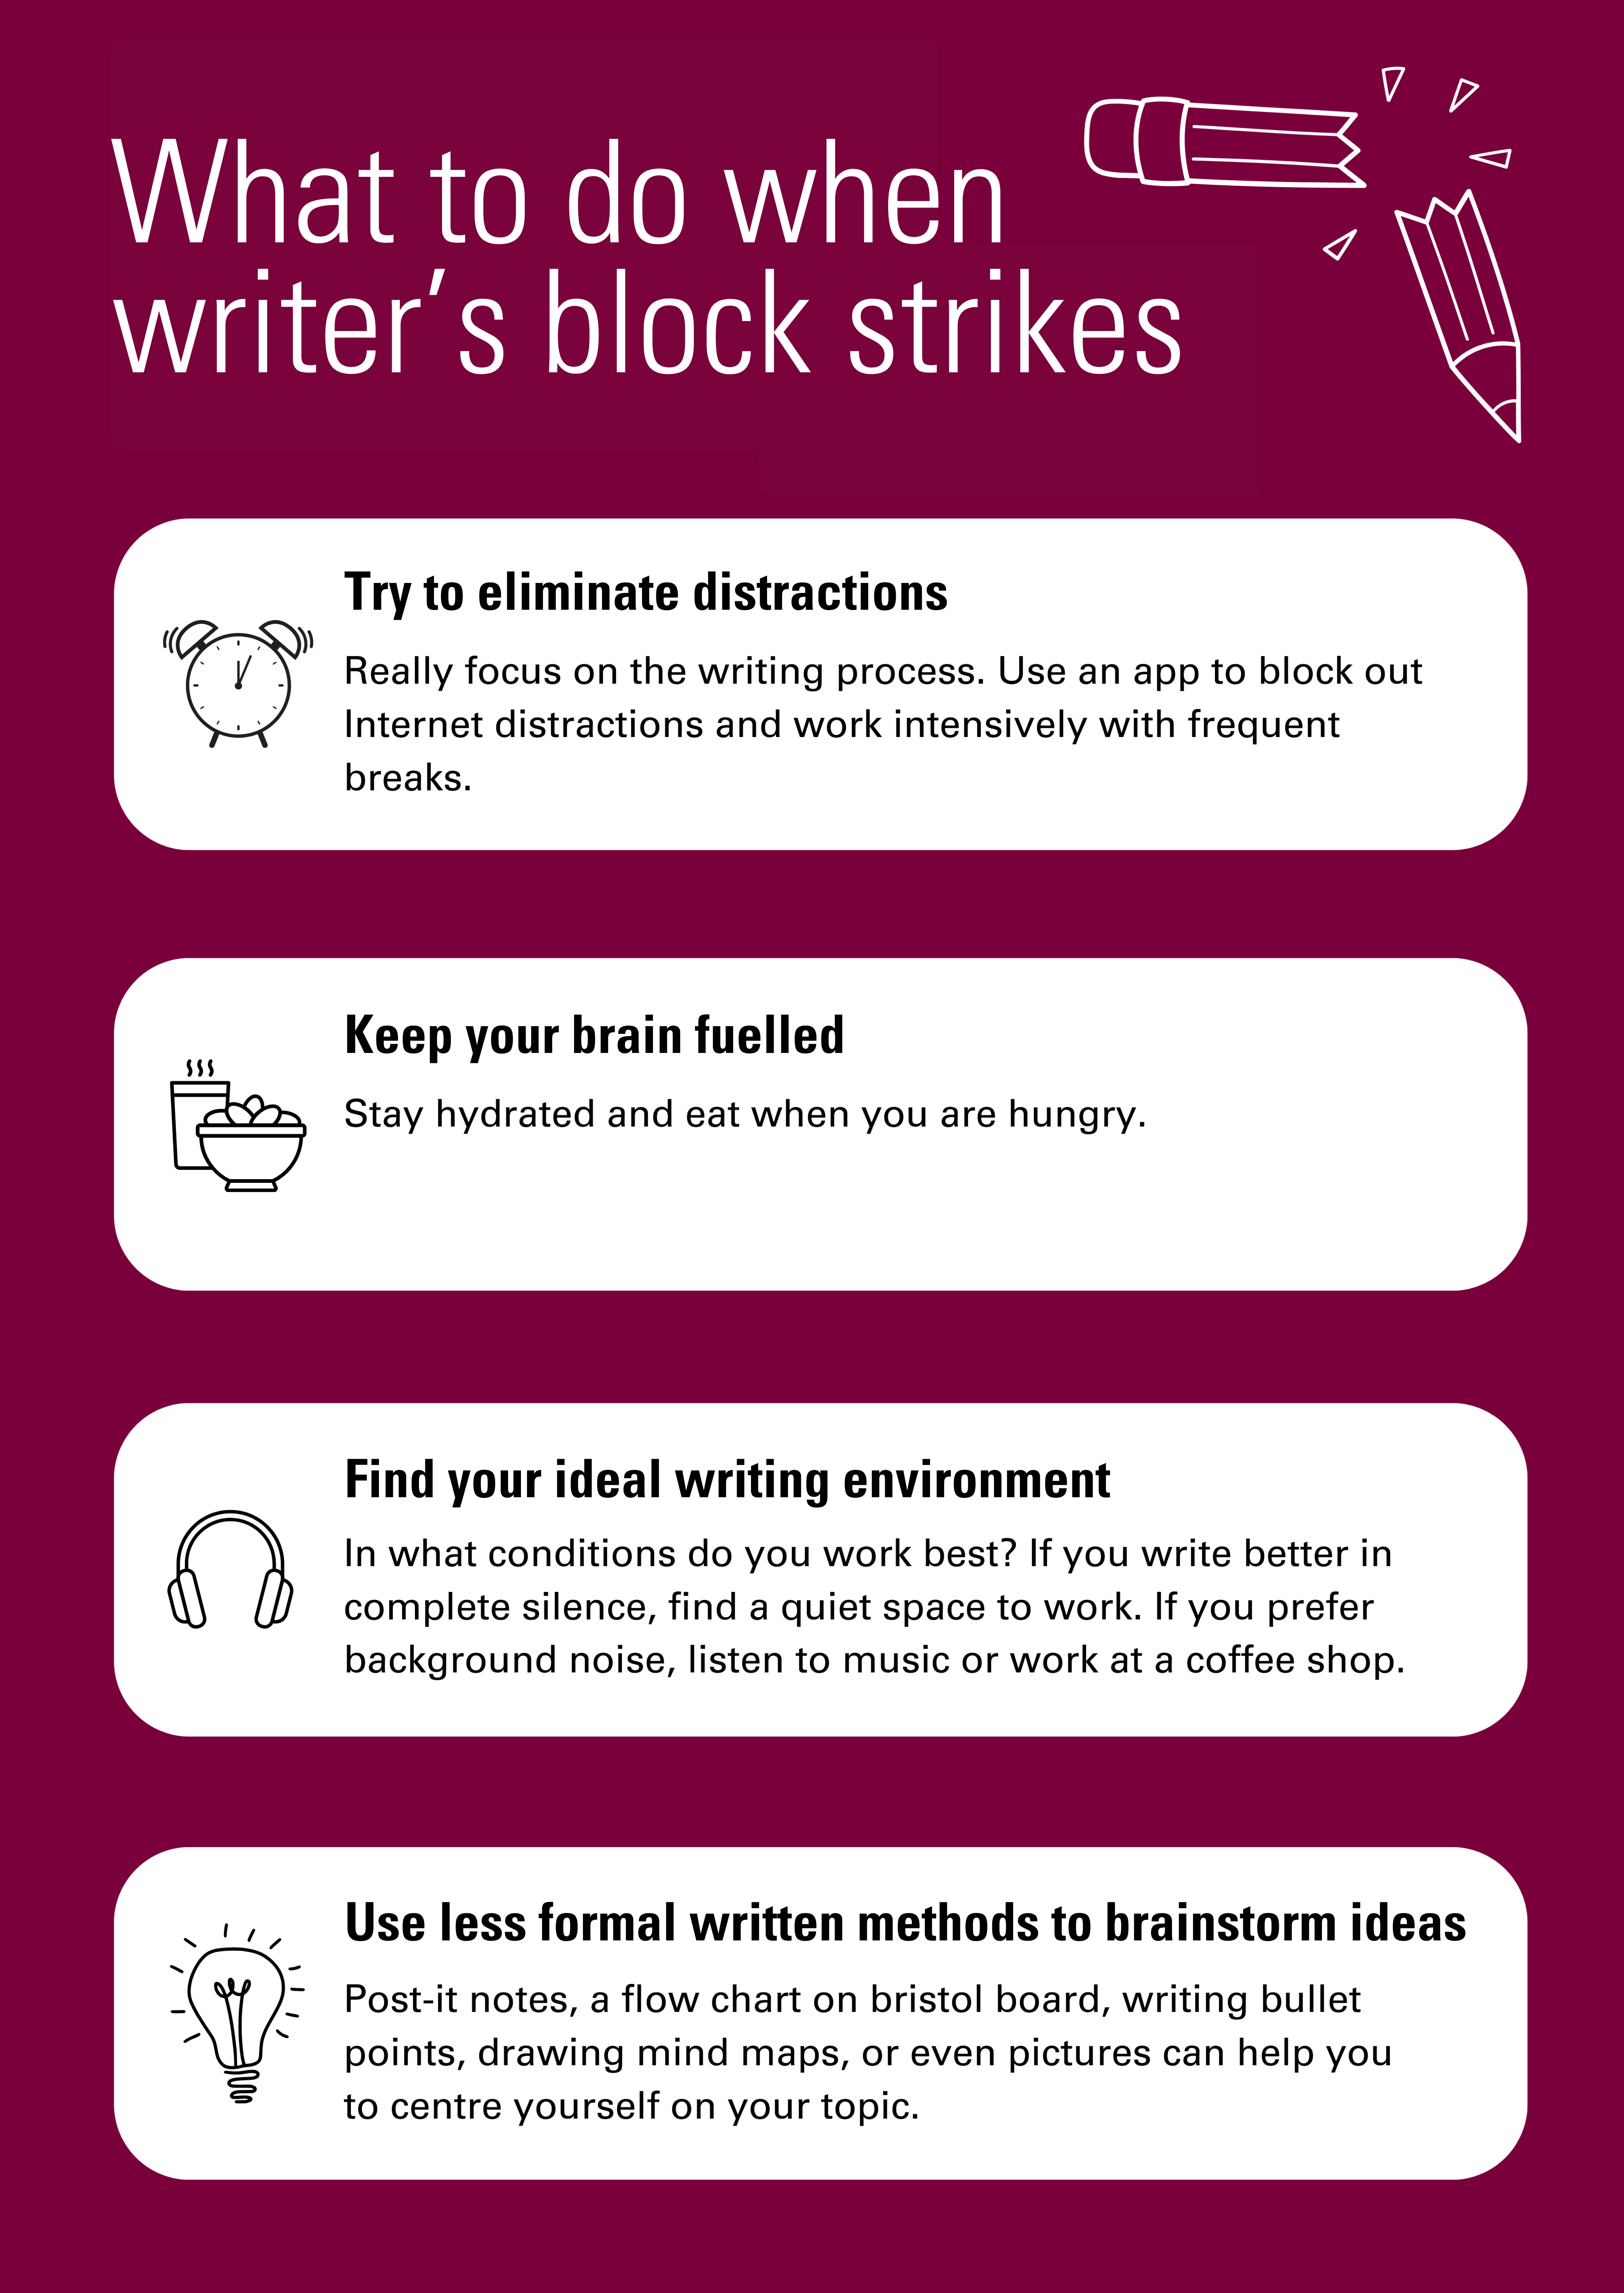 Poster highlighting four suggestions for fighting writer’s block with text description below.